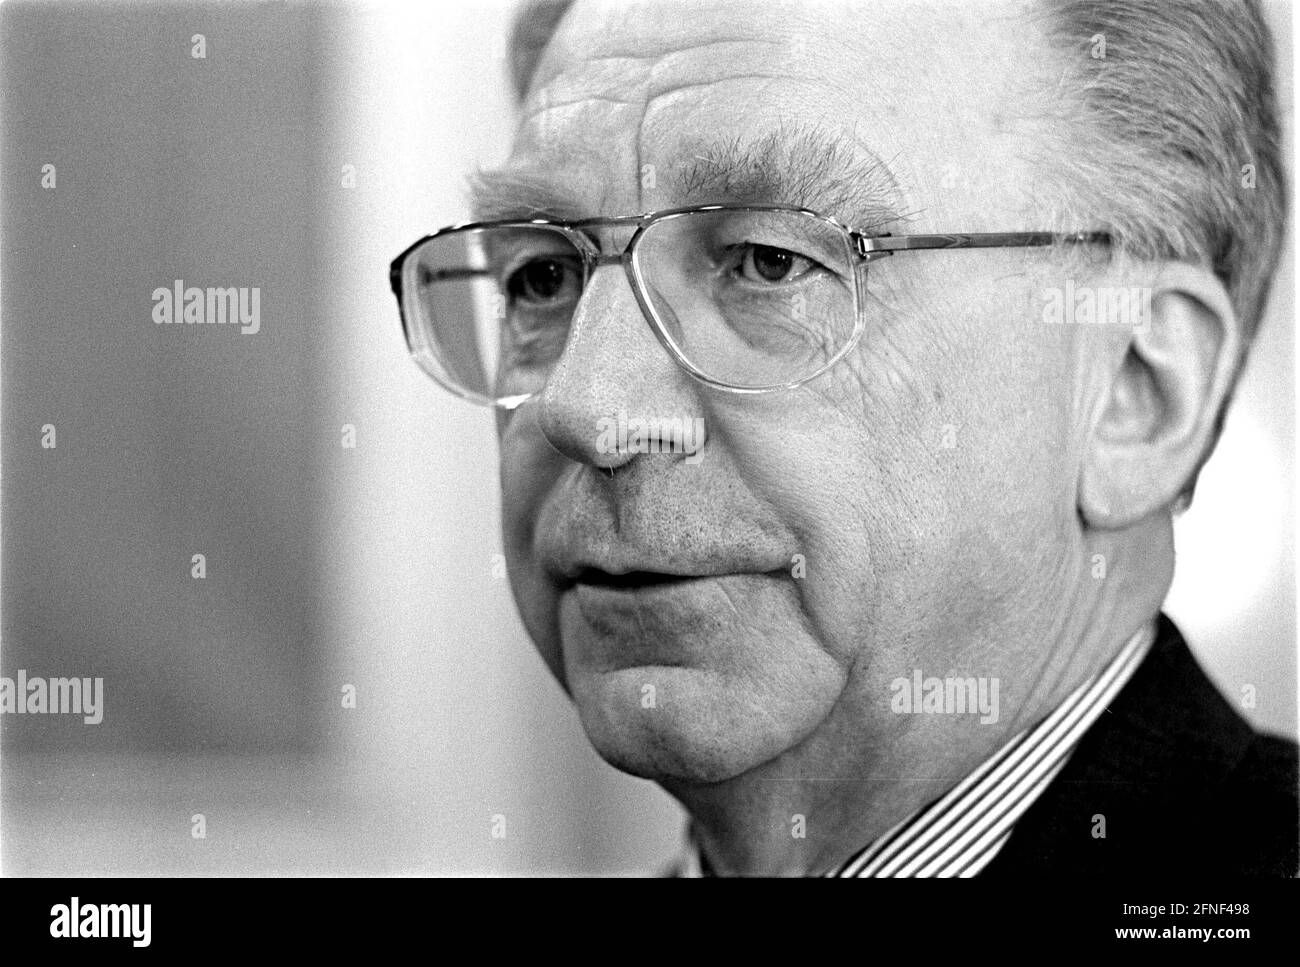 Lothar Späth (born 1937), former Minister President of Baden-Württemberg and entrepreneur. The picture was taken during a reading at the Harenberg City Center, Dortmund. [automated translation] Stock Photo